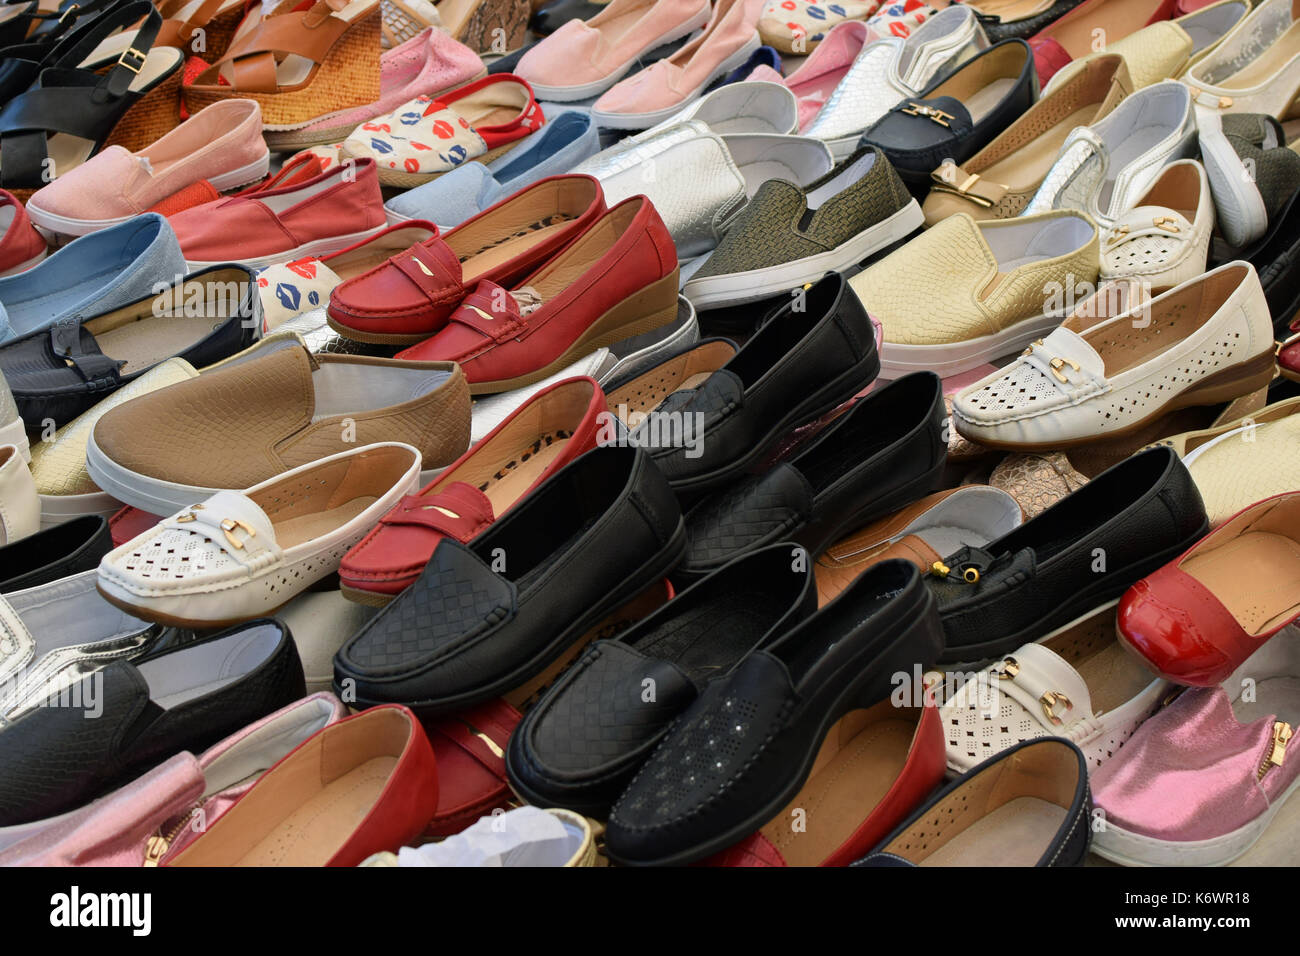 Flat shoes for women on sale at street market. Casual footwear. Stock Photo